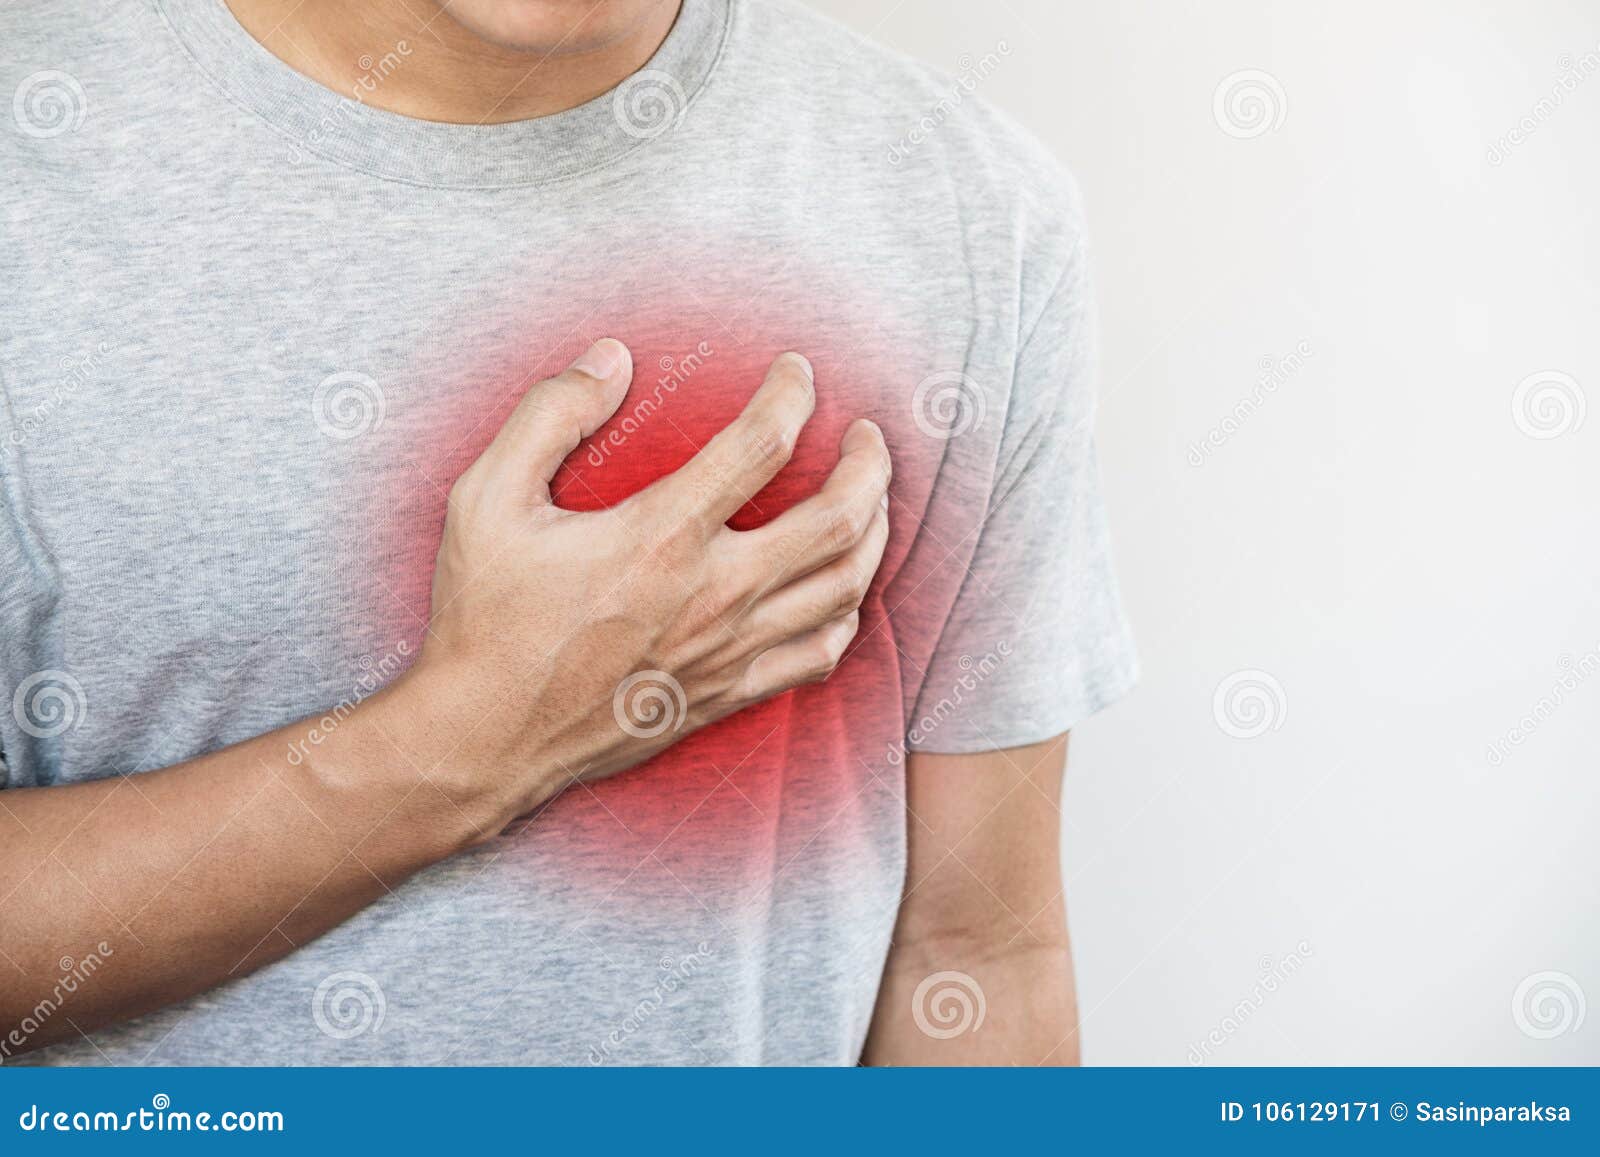 a man touching his heart. heart attack, heart failure, others heart disease